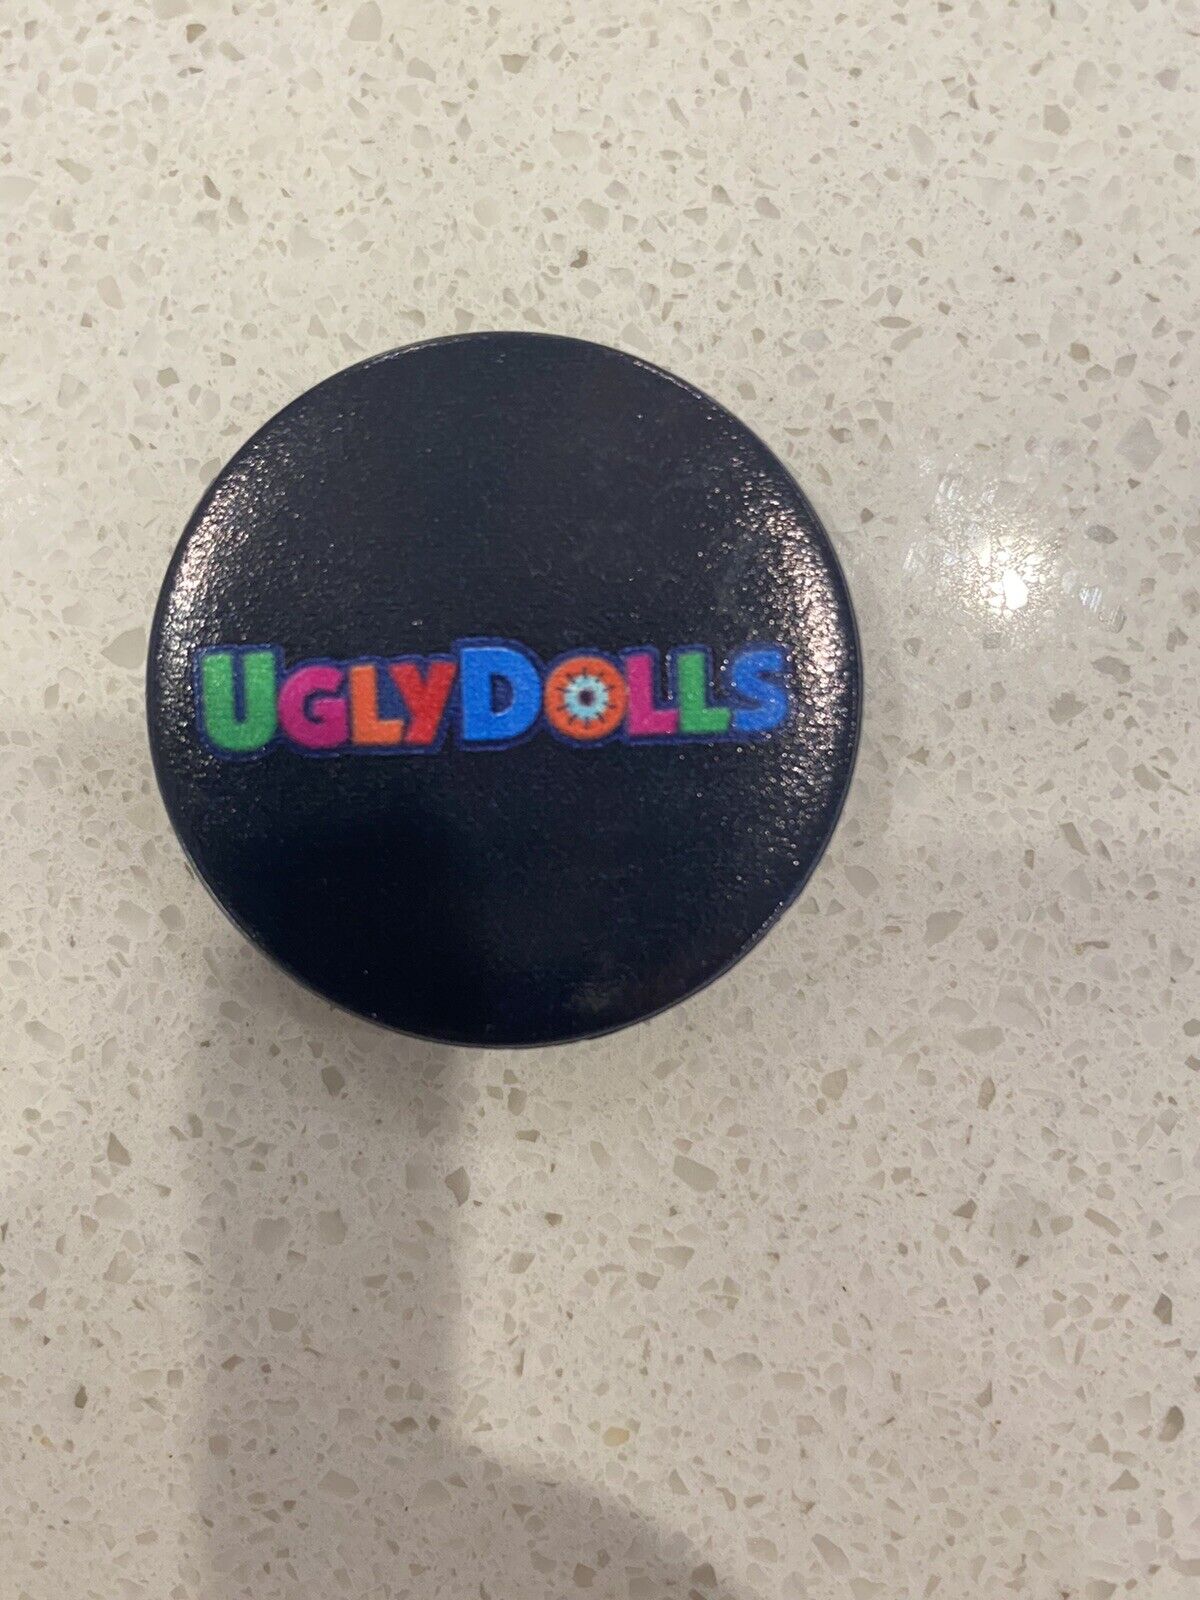 SDCC 2018 Ugly Dolls Exclusive Cell Phone Pop Grip Stand Phone Accessory